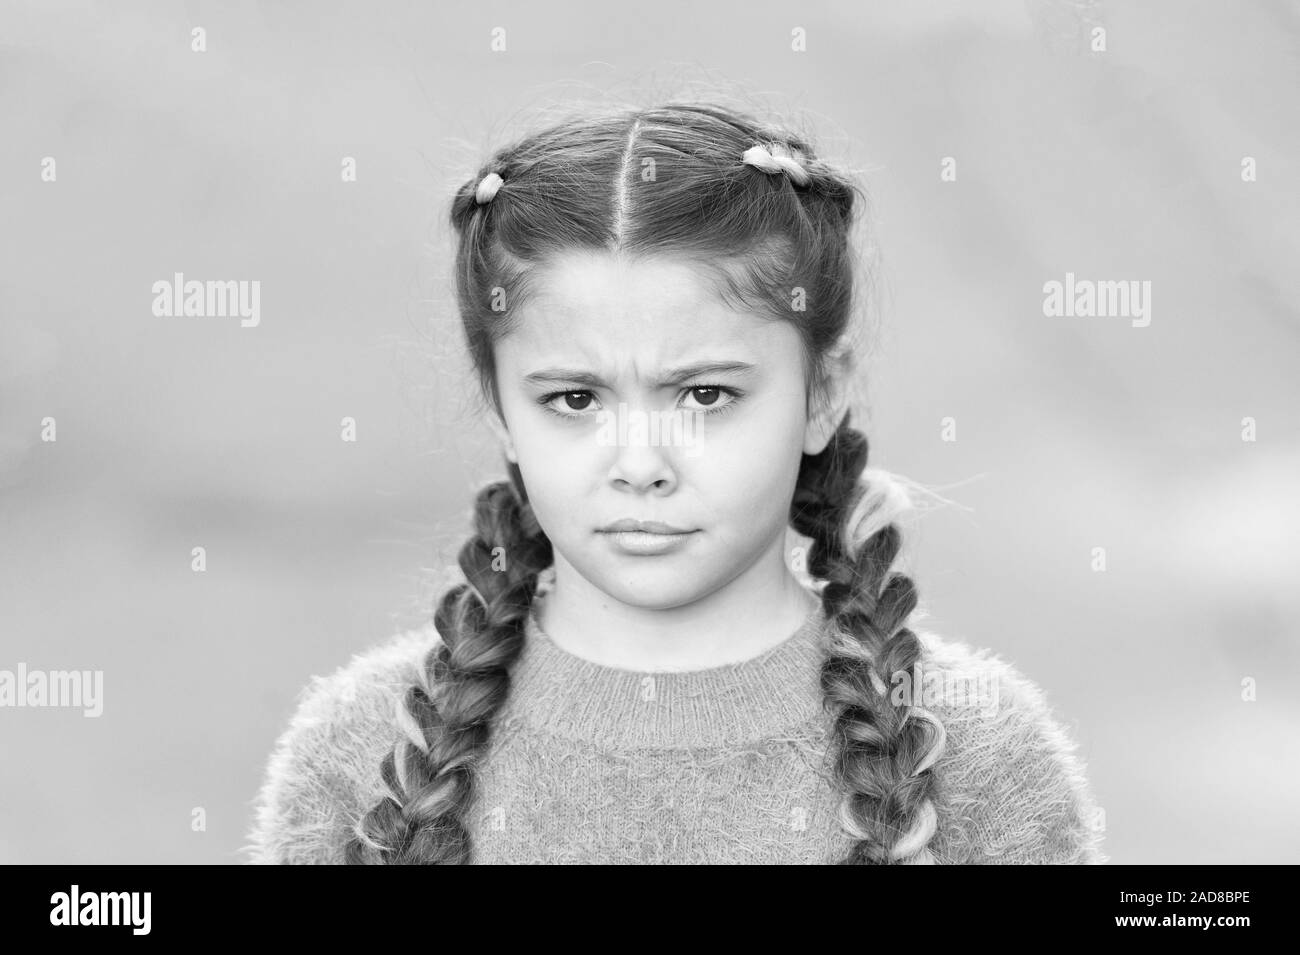 What is wrong. Hairdresser salon. Braided cutie. Little girl with cute  braids close up. Kanekalon strand in braids of child. Braided hairstyle  concept. Girl with braided hair style pink kanekalon Stock Photo -